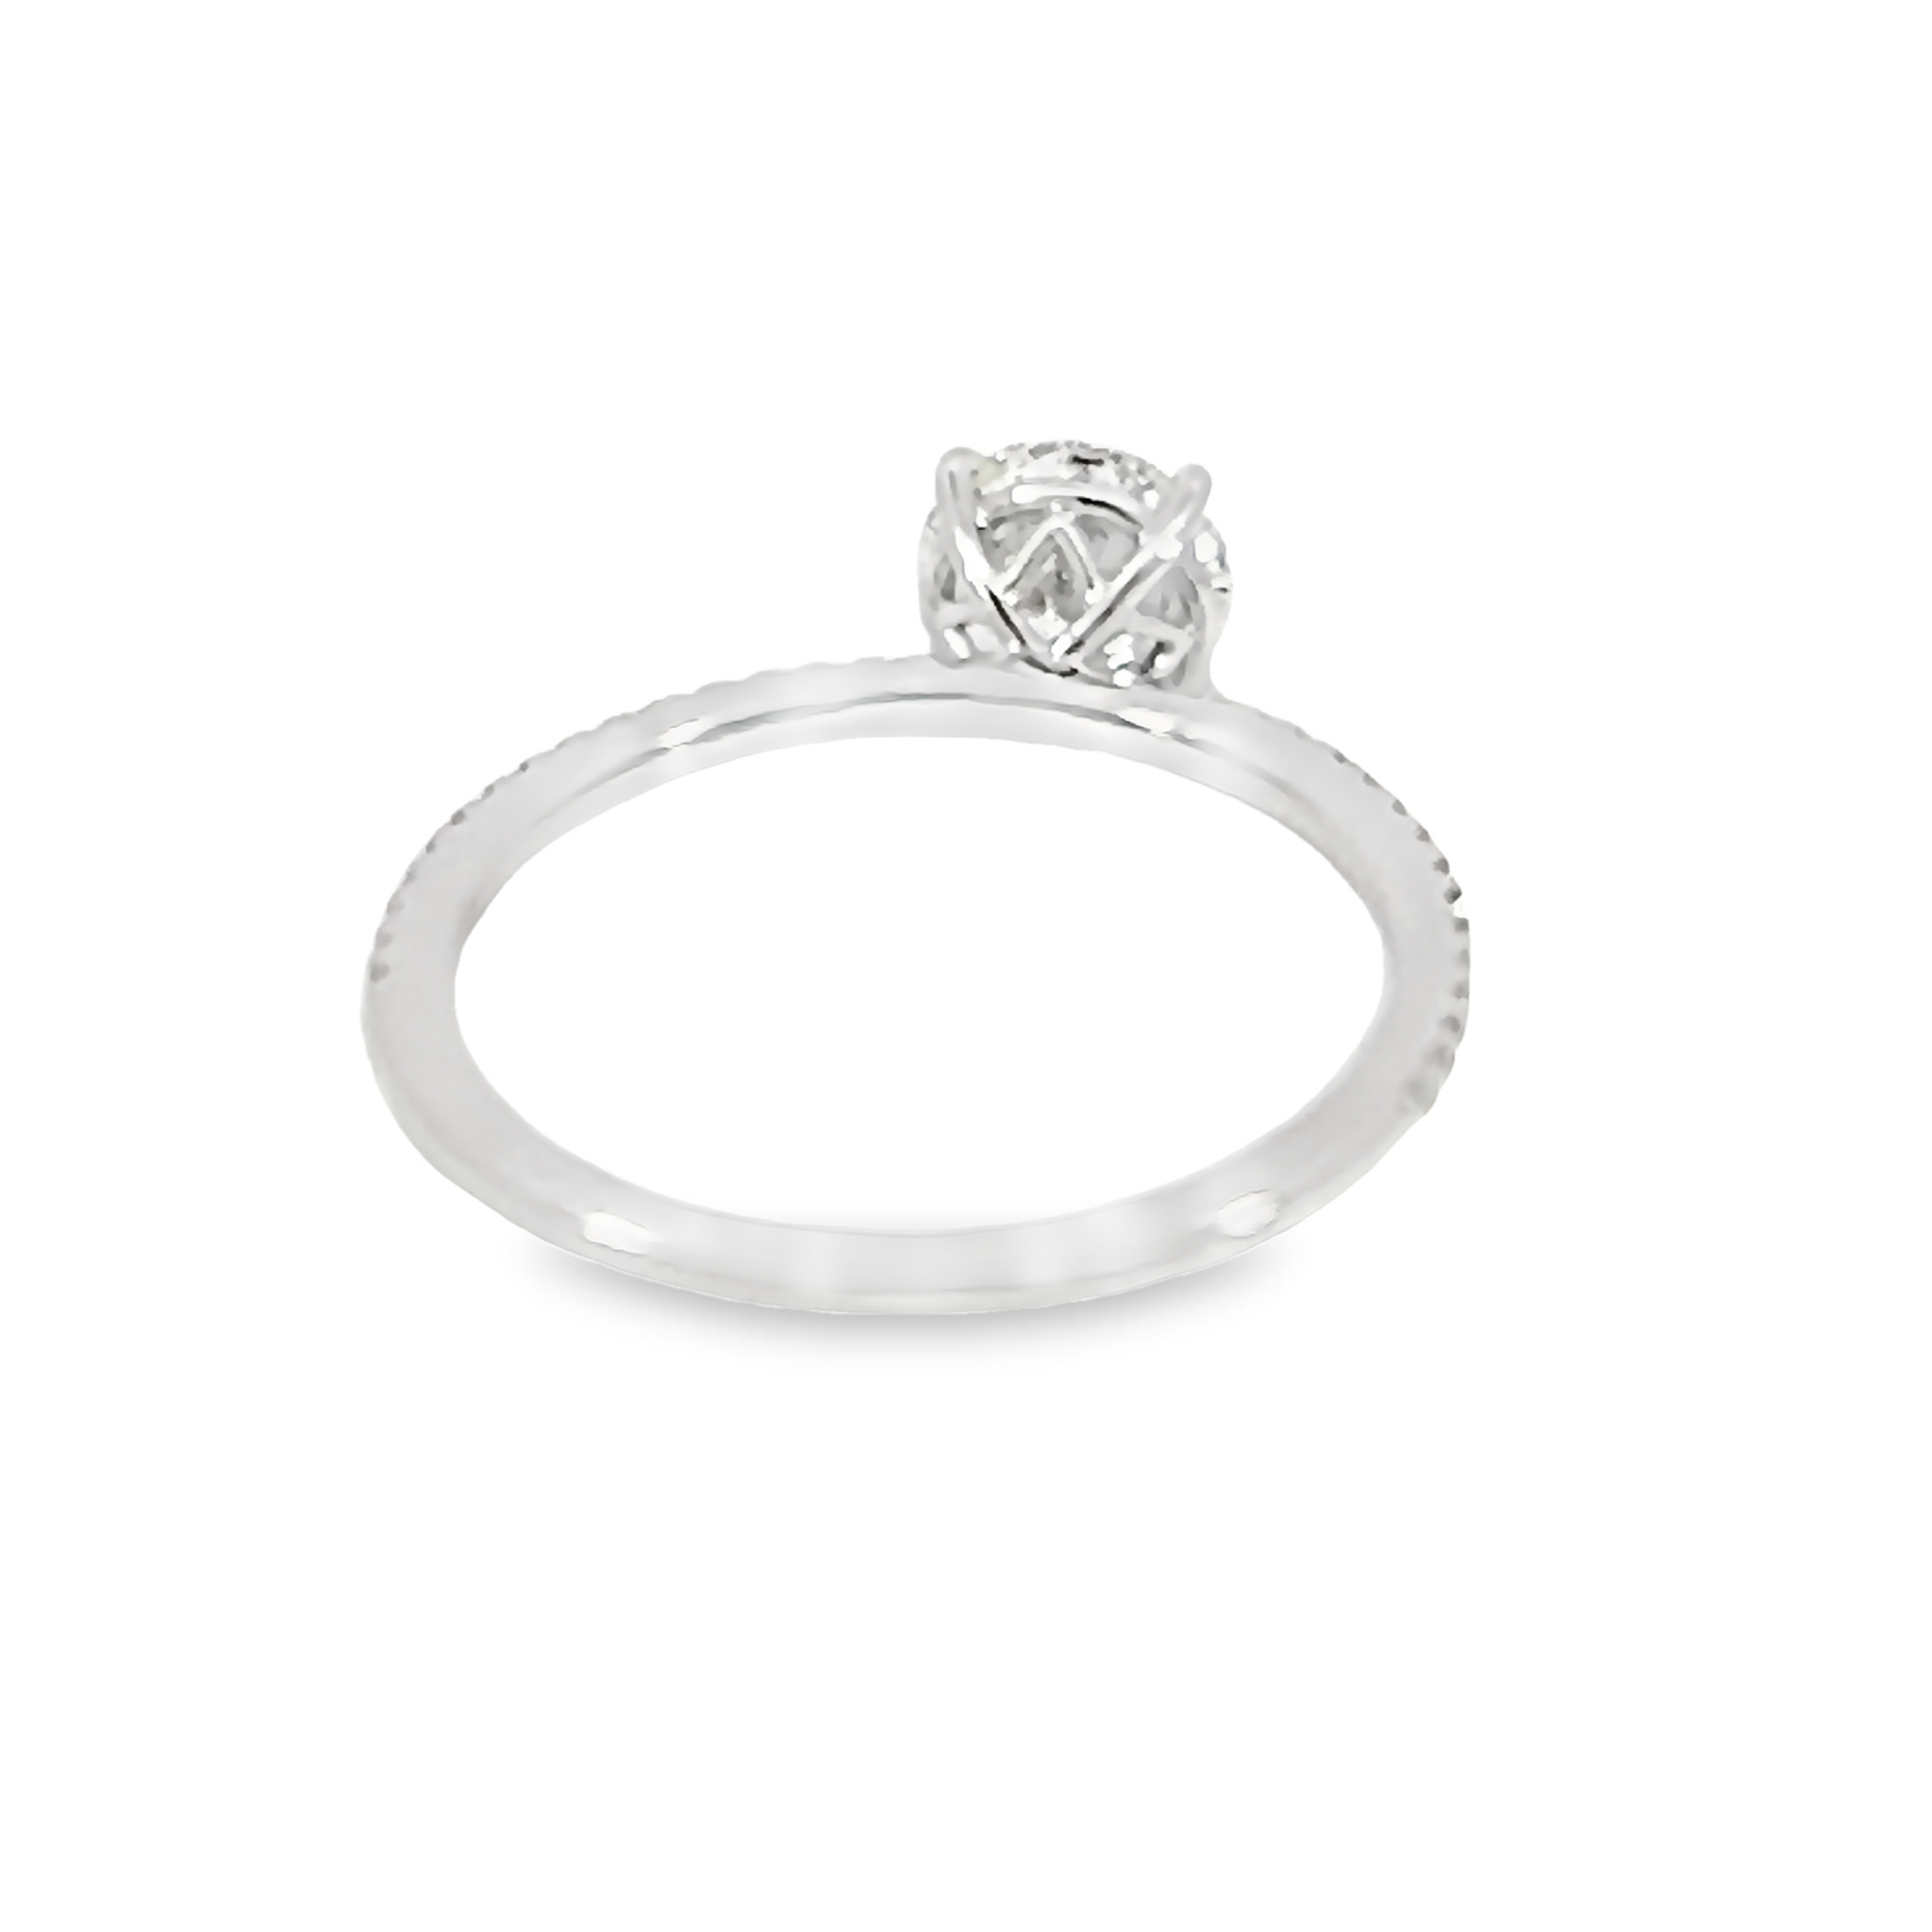 Round Brilliant Diamond Engagement Ring With Accented Shank